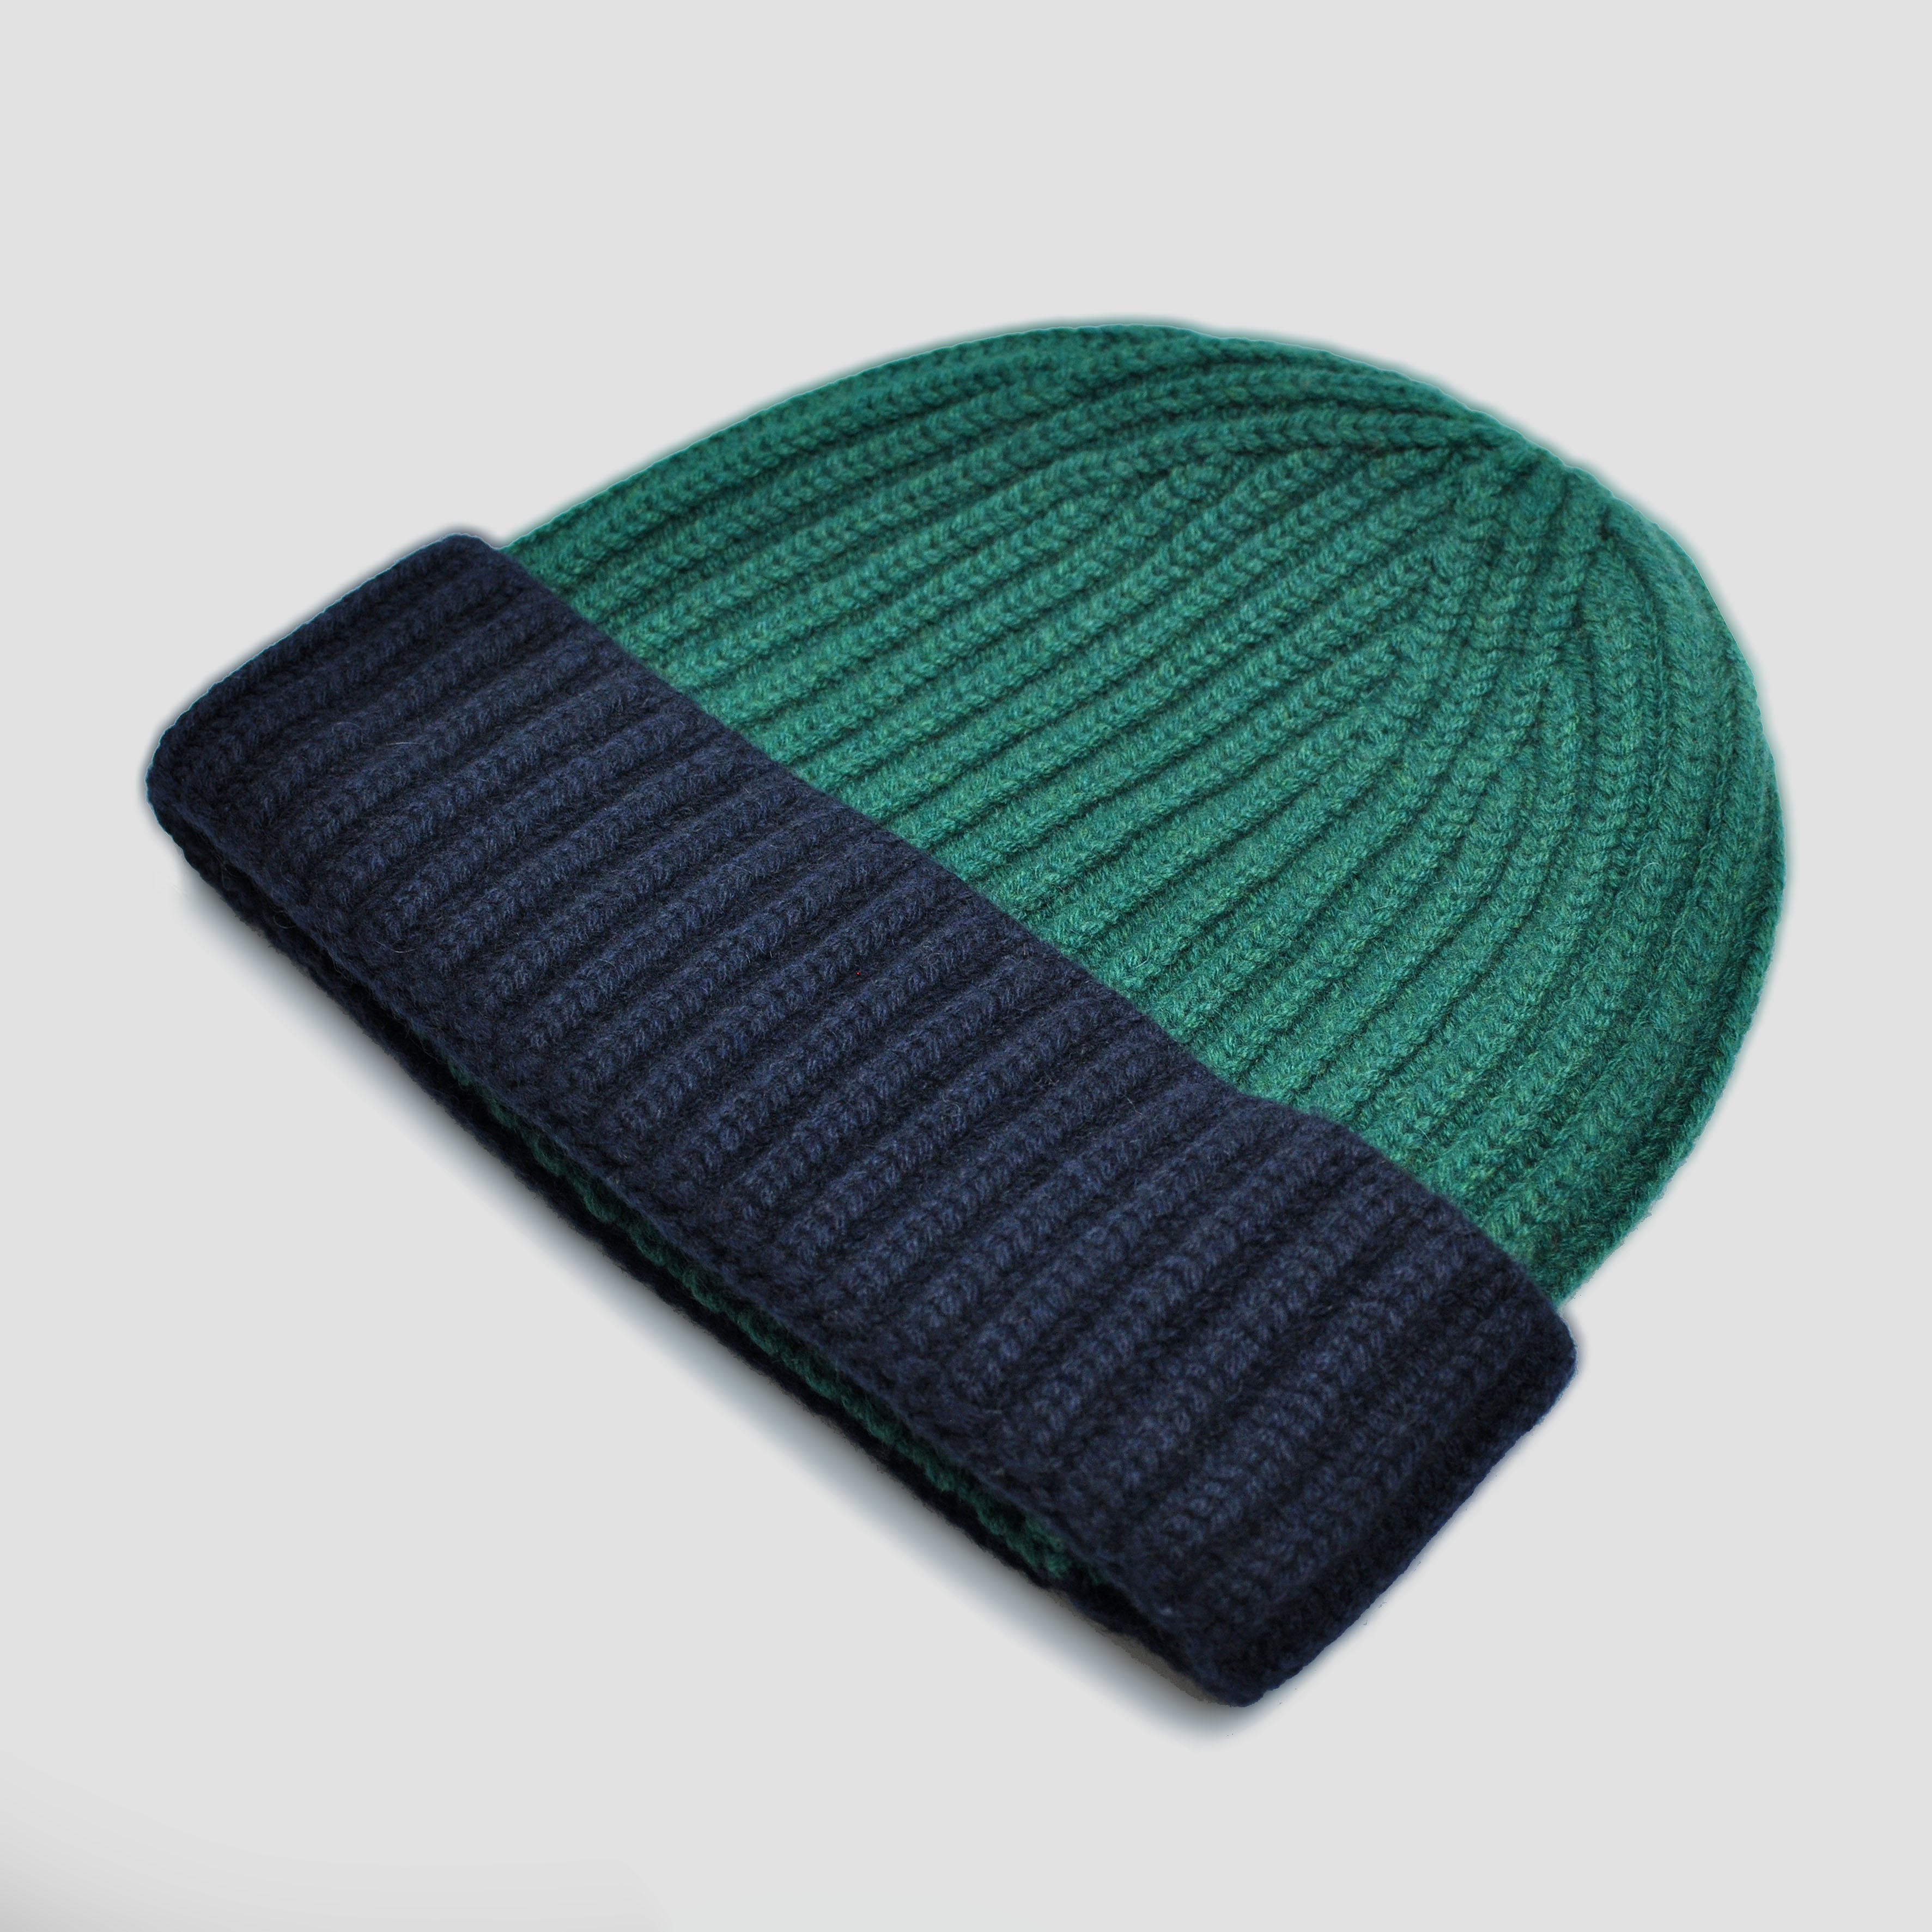 Four Ply Cashmere Winter Beanie in Green & Blue